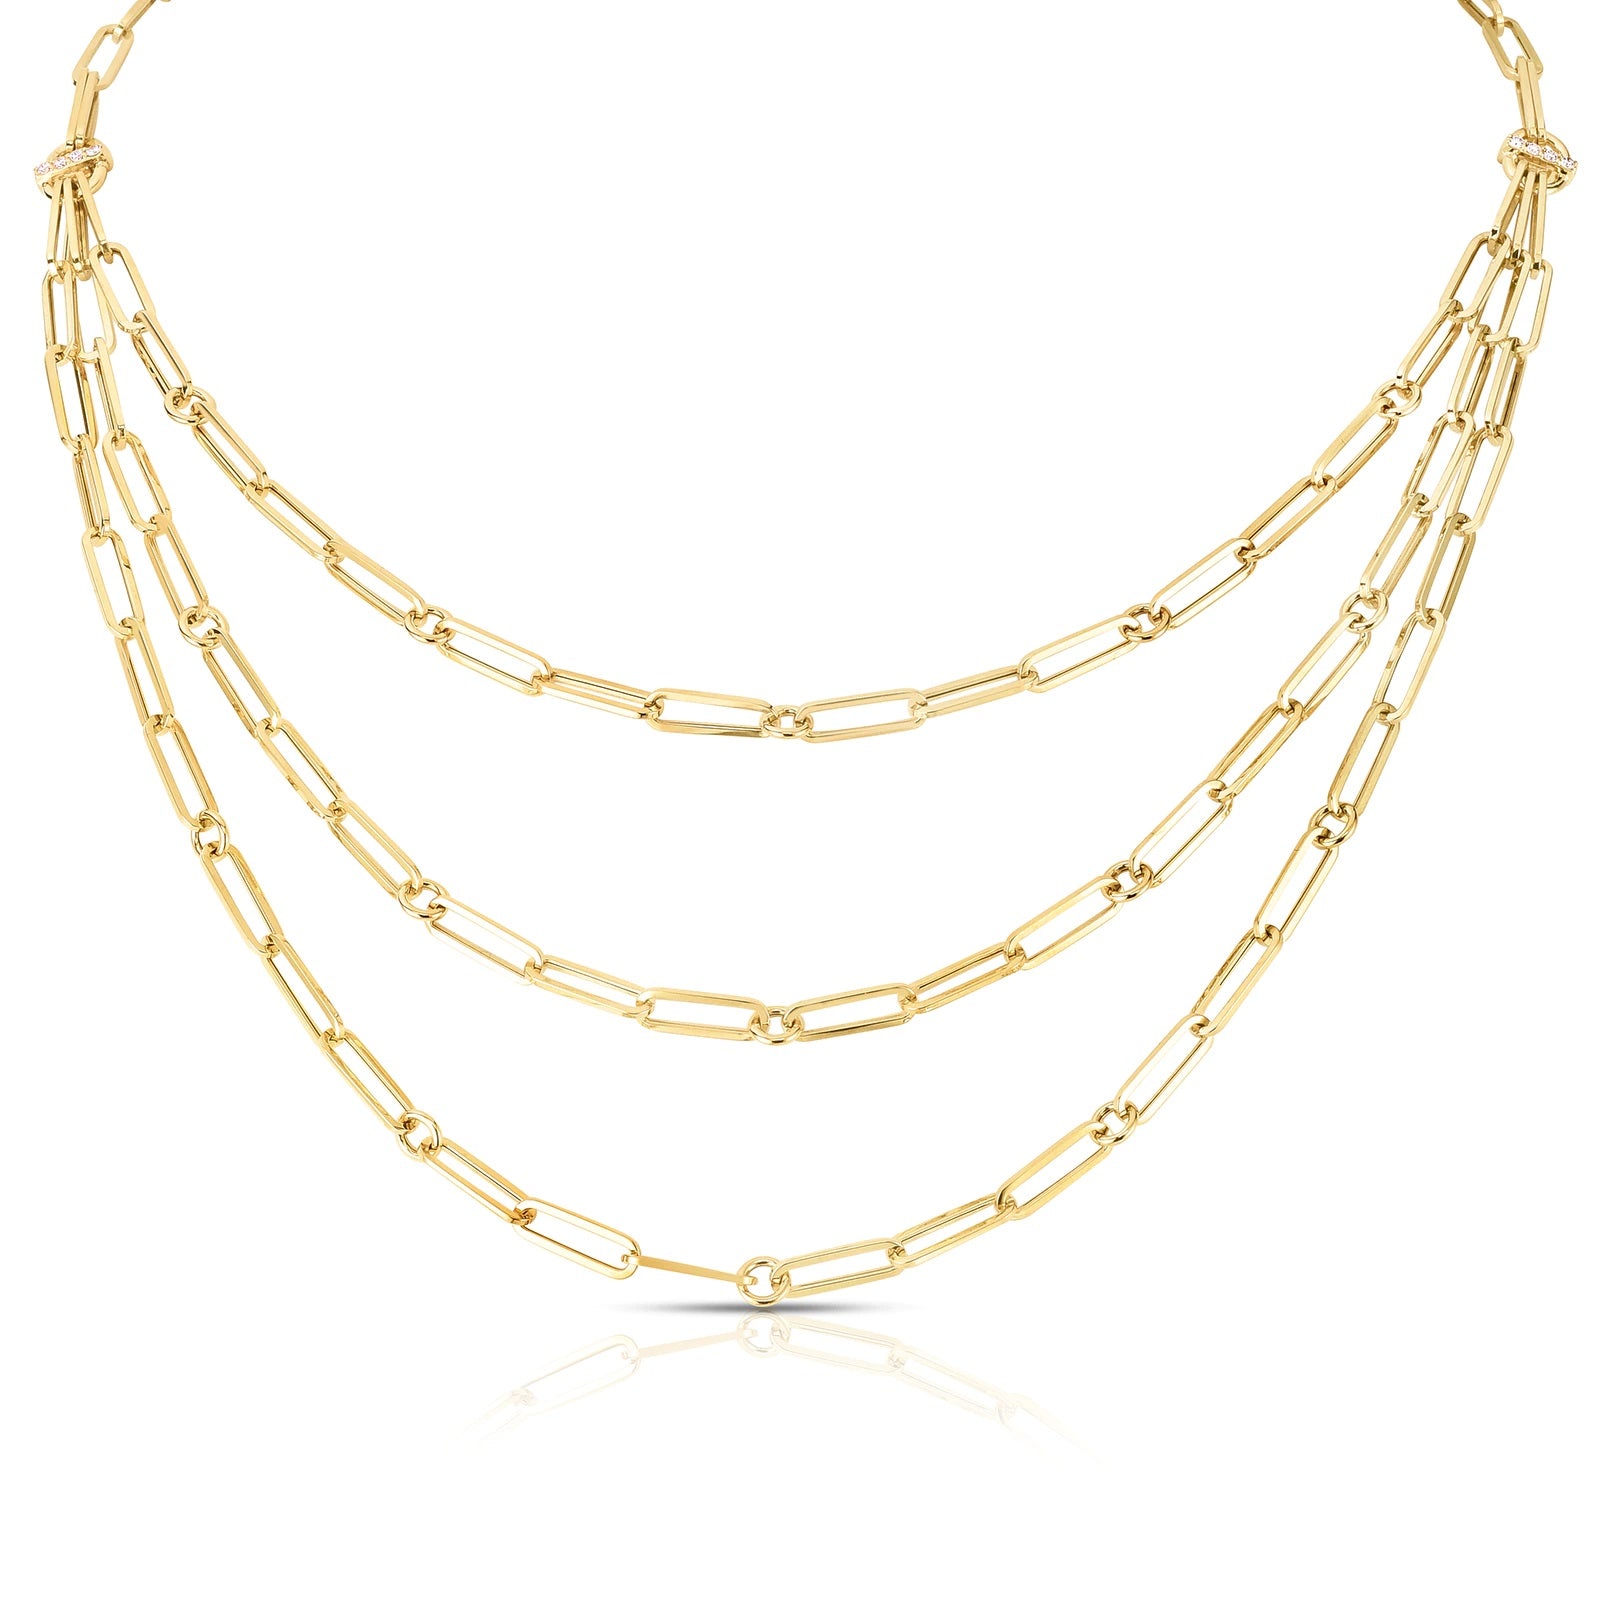 ROBERTO COIN 18K YELLOW GOLD TRIPLE PAPERCLIP NECKLACE